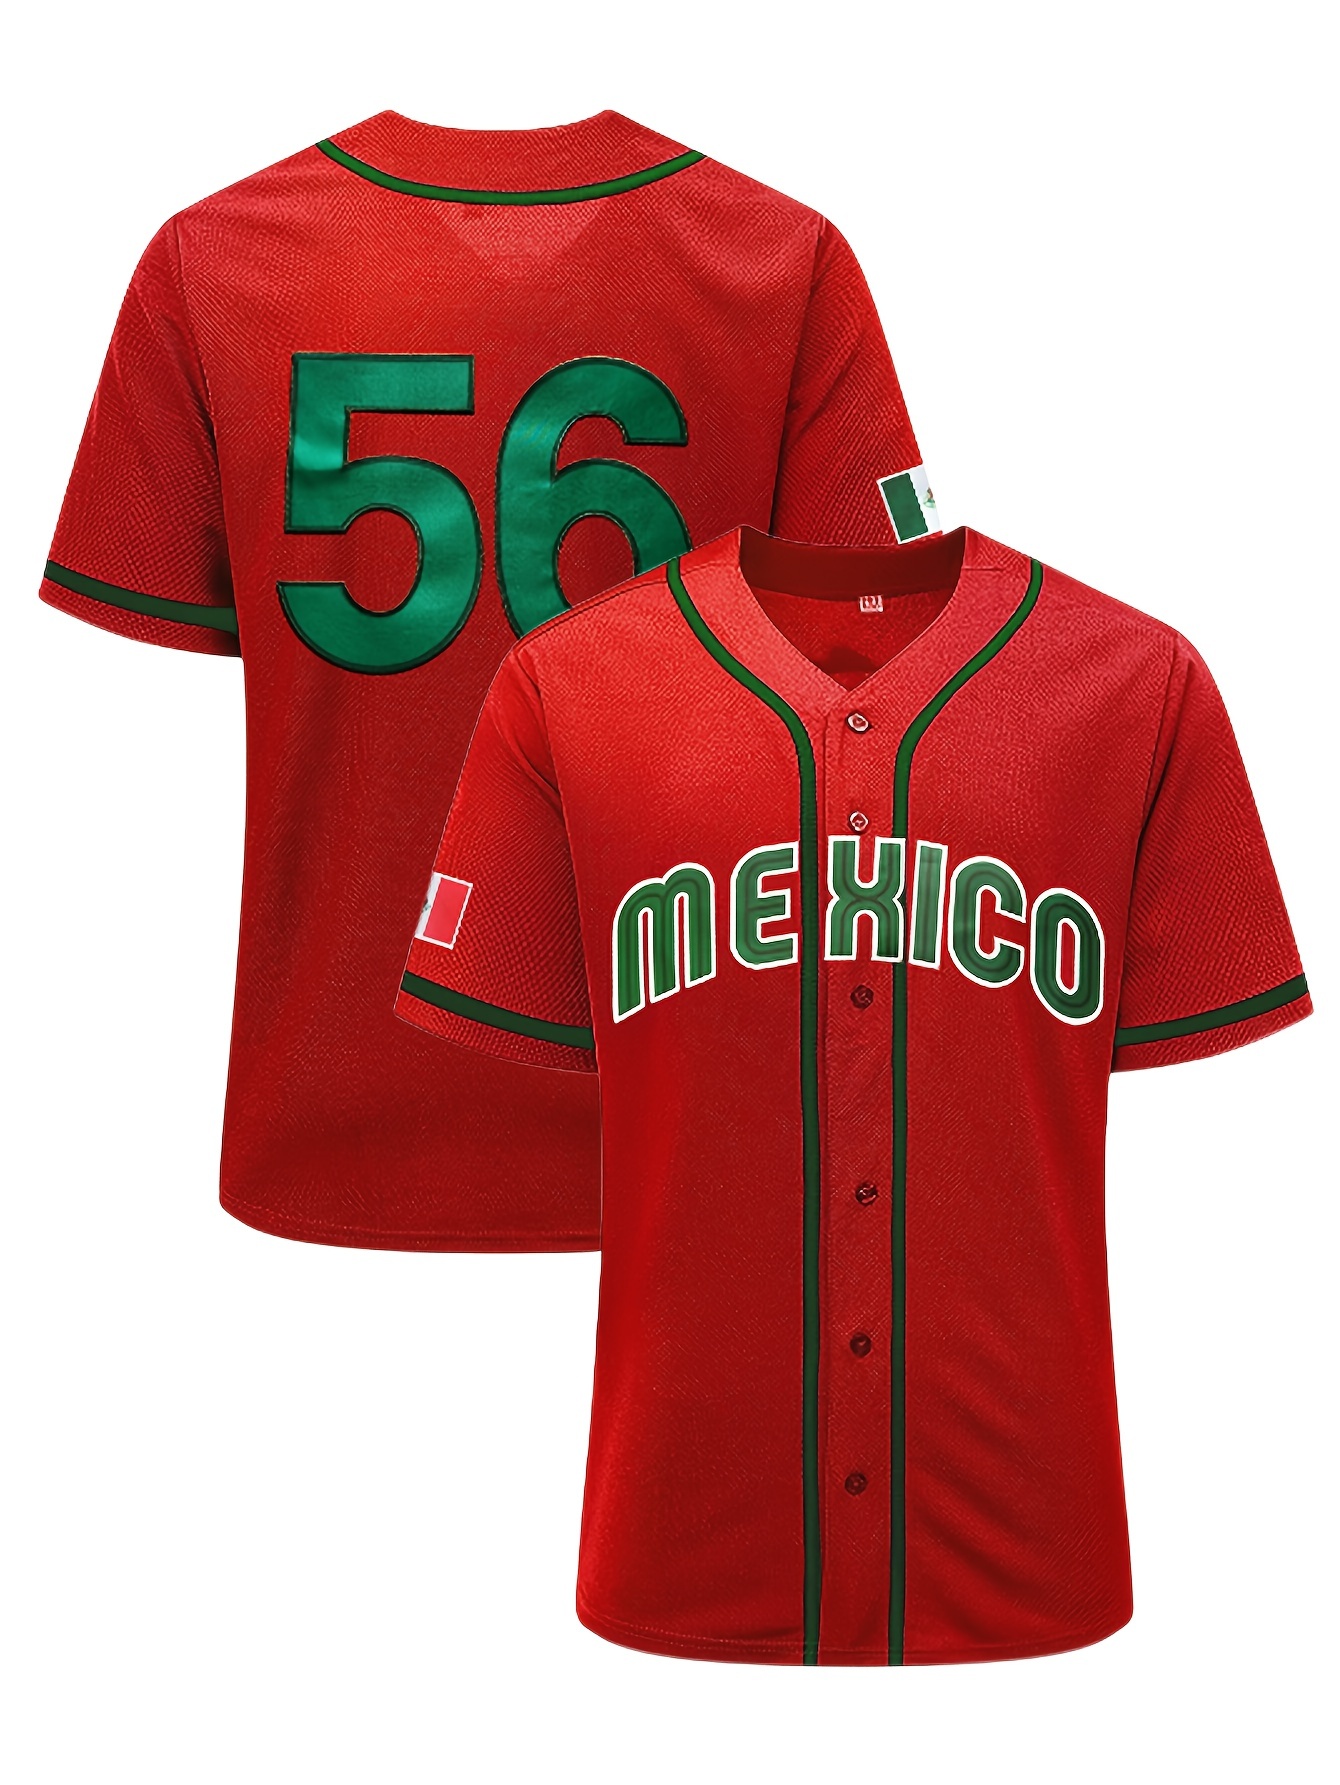 Men's Mexico #7 Baseball Jersey, Retro Classic Baseball Shirt, Breathable Embroidery Button Up Sports Uniform for Training Competition,Temu